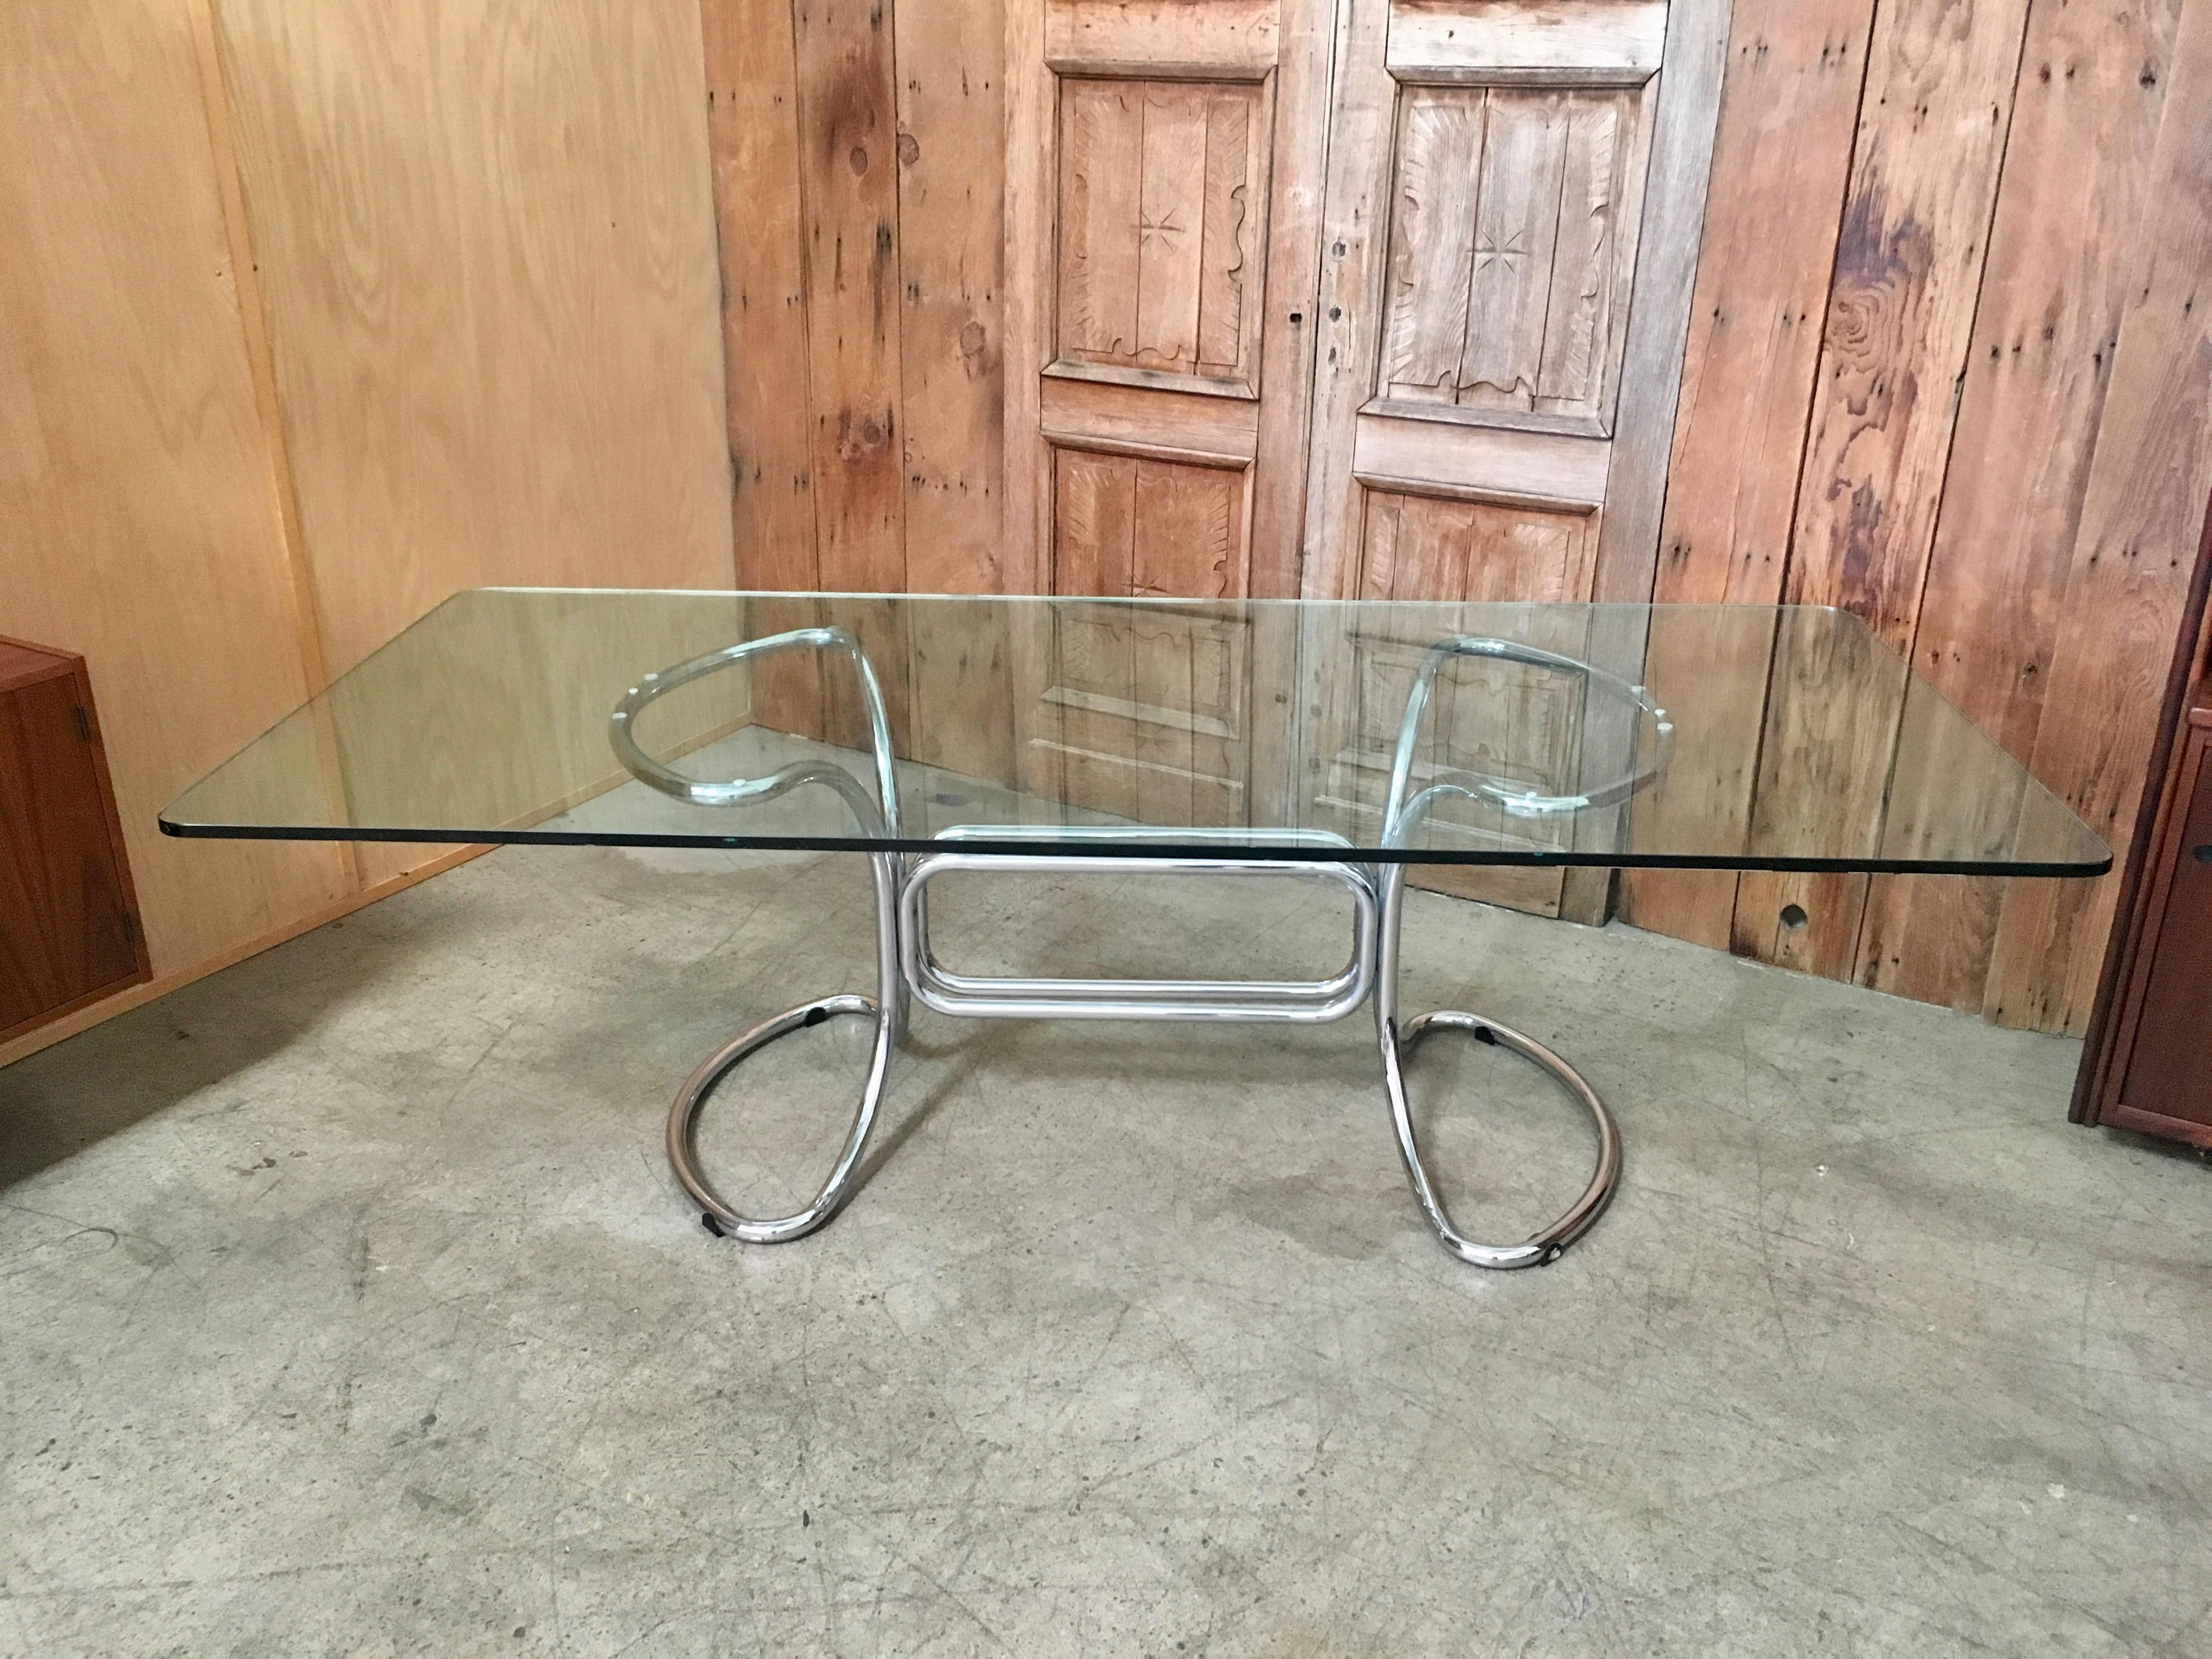 Glass and Steel Tube Dining Table by Giotto Stoppino, Italy, 1970s (Moderne der Mitte des Jahrhunderts)